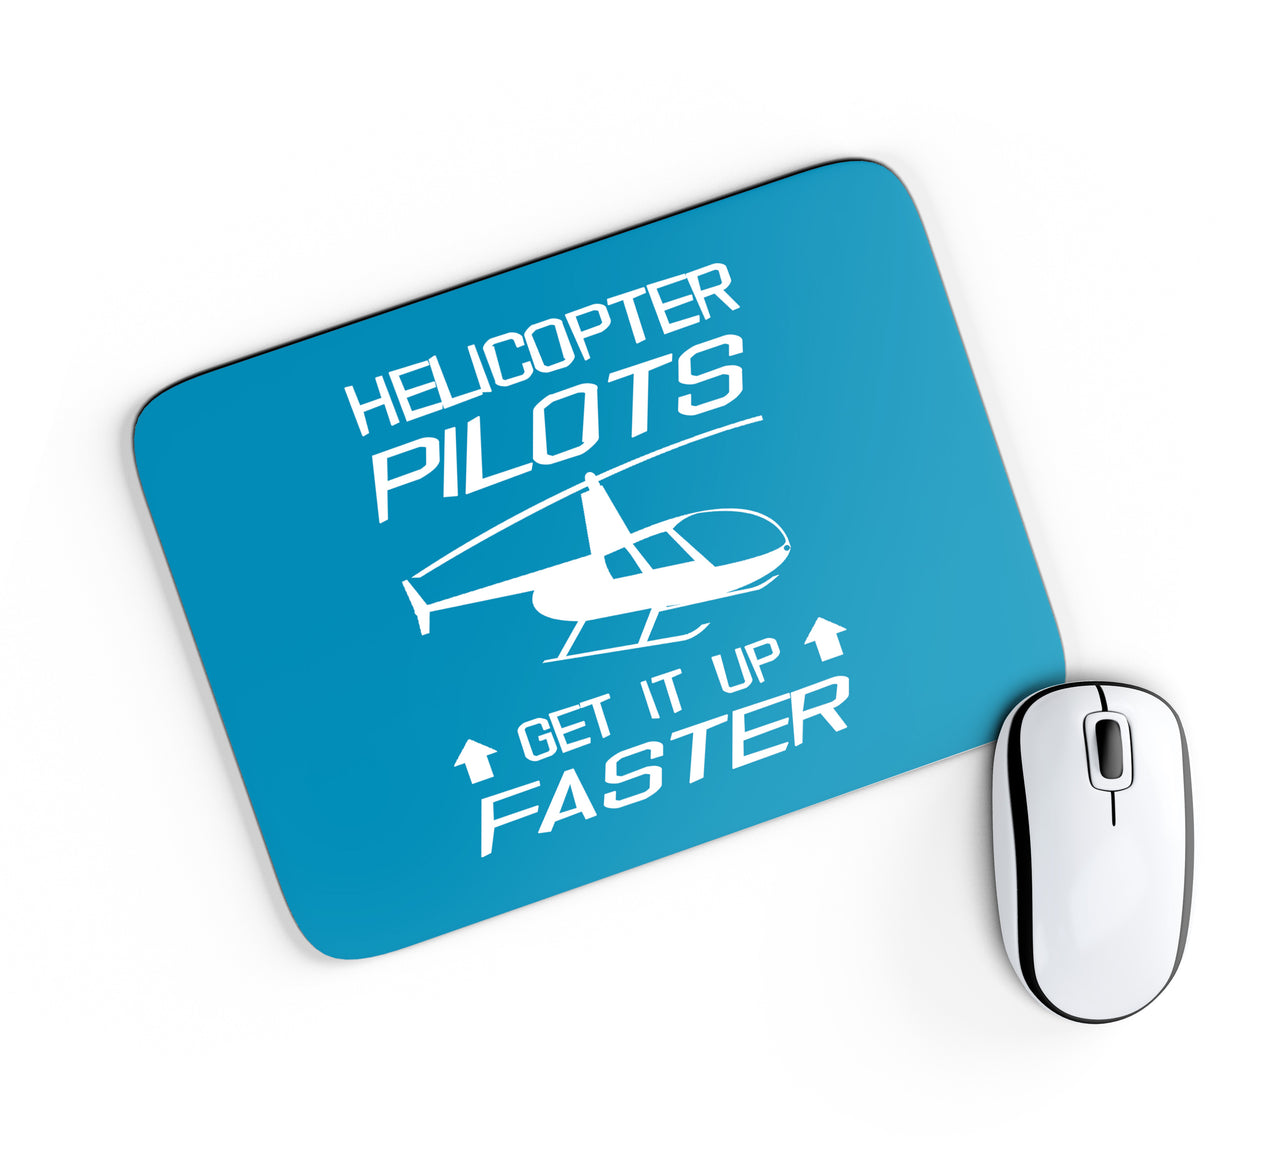 Helicopter Pilots Get It Up Faster Designed Mouse Pads